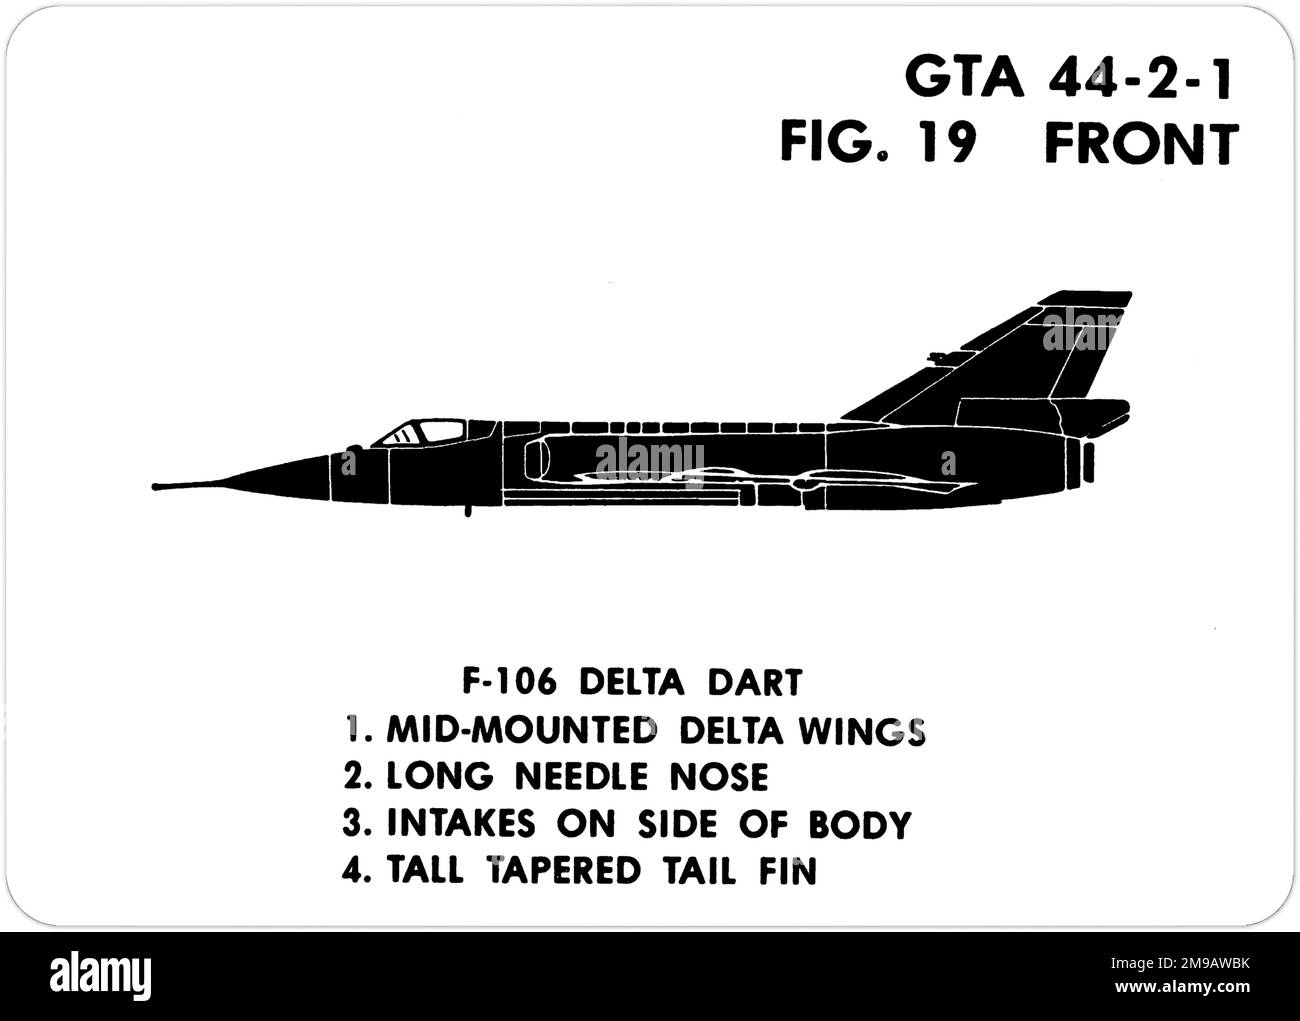 Convair F-106A Delta Dart. This is one of the series of Graphics Training Aids (GTA) used by the United States Army to train their personnel to recognize friendly and hostile aircraft. This particular set, GTA 44-2-1, was issued in July1977. The set features aircraft from: Canada, Italy, United Kingdom, United States, and the USSR. Stock Photo